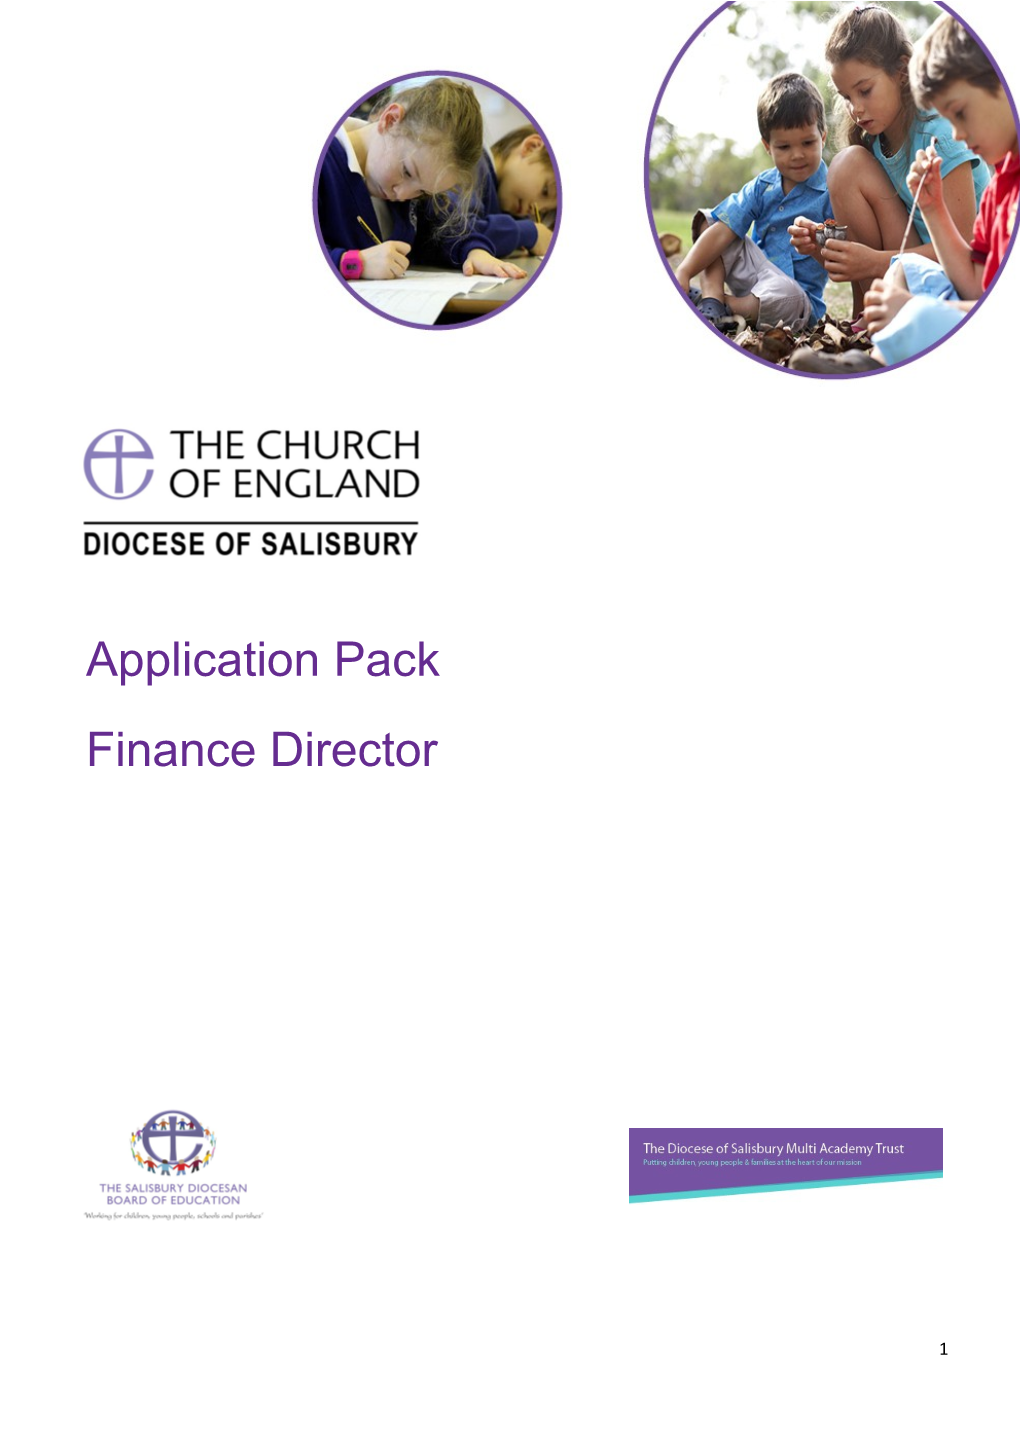 About Salisbury Diocesan Board of Education